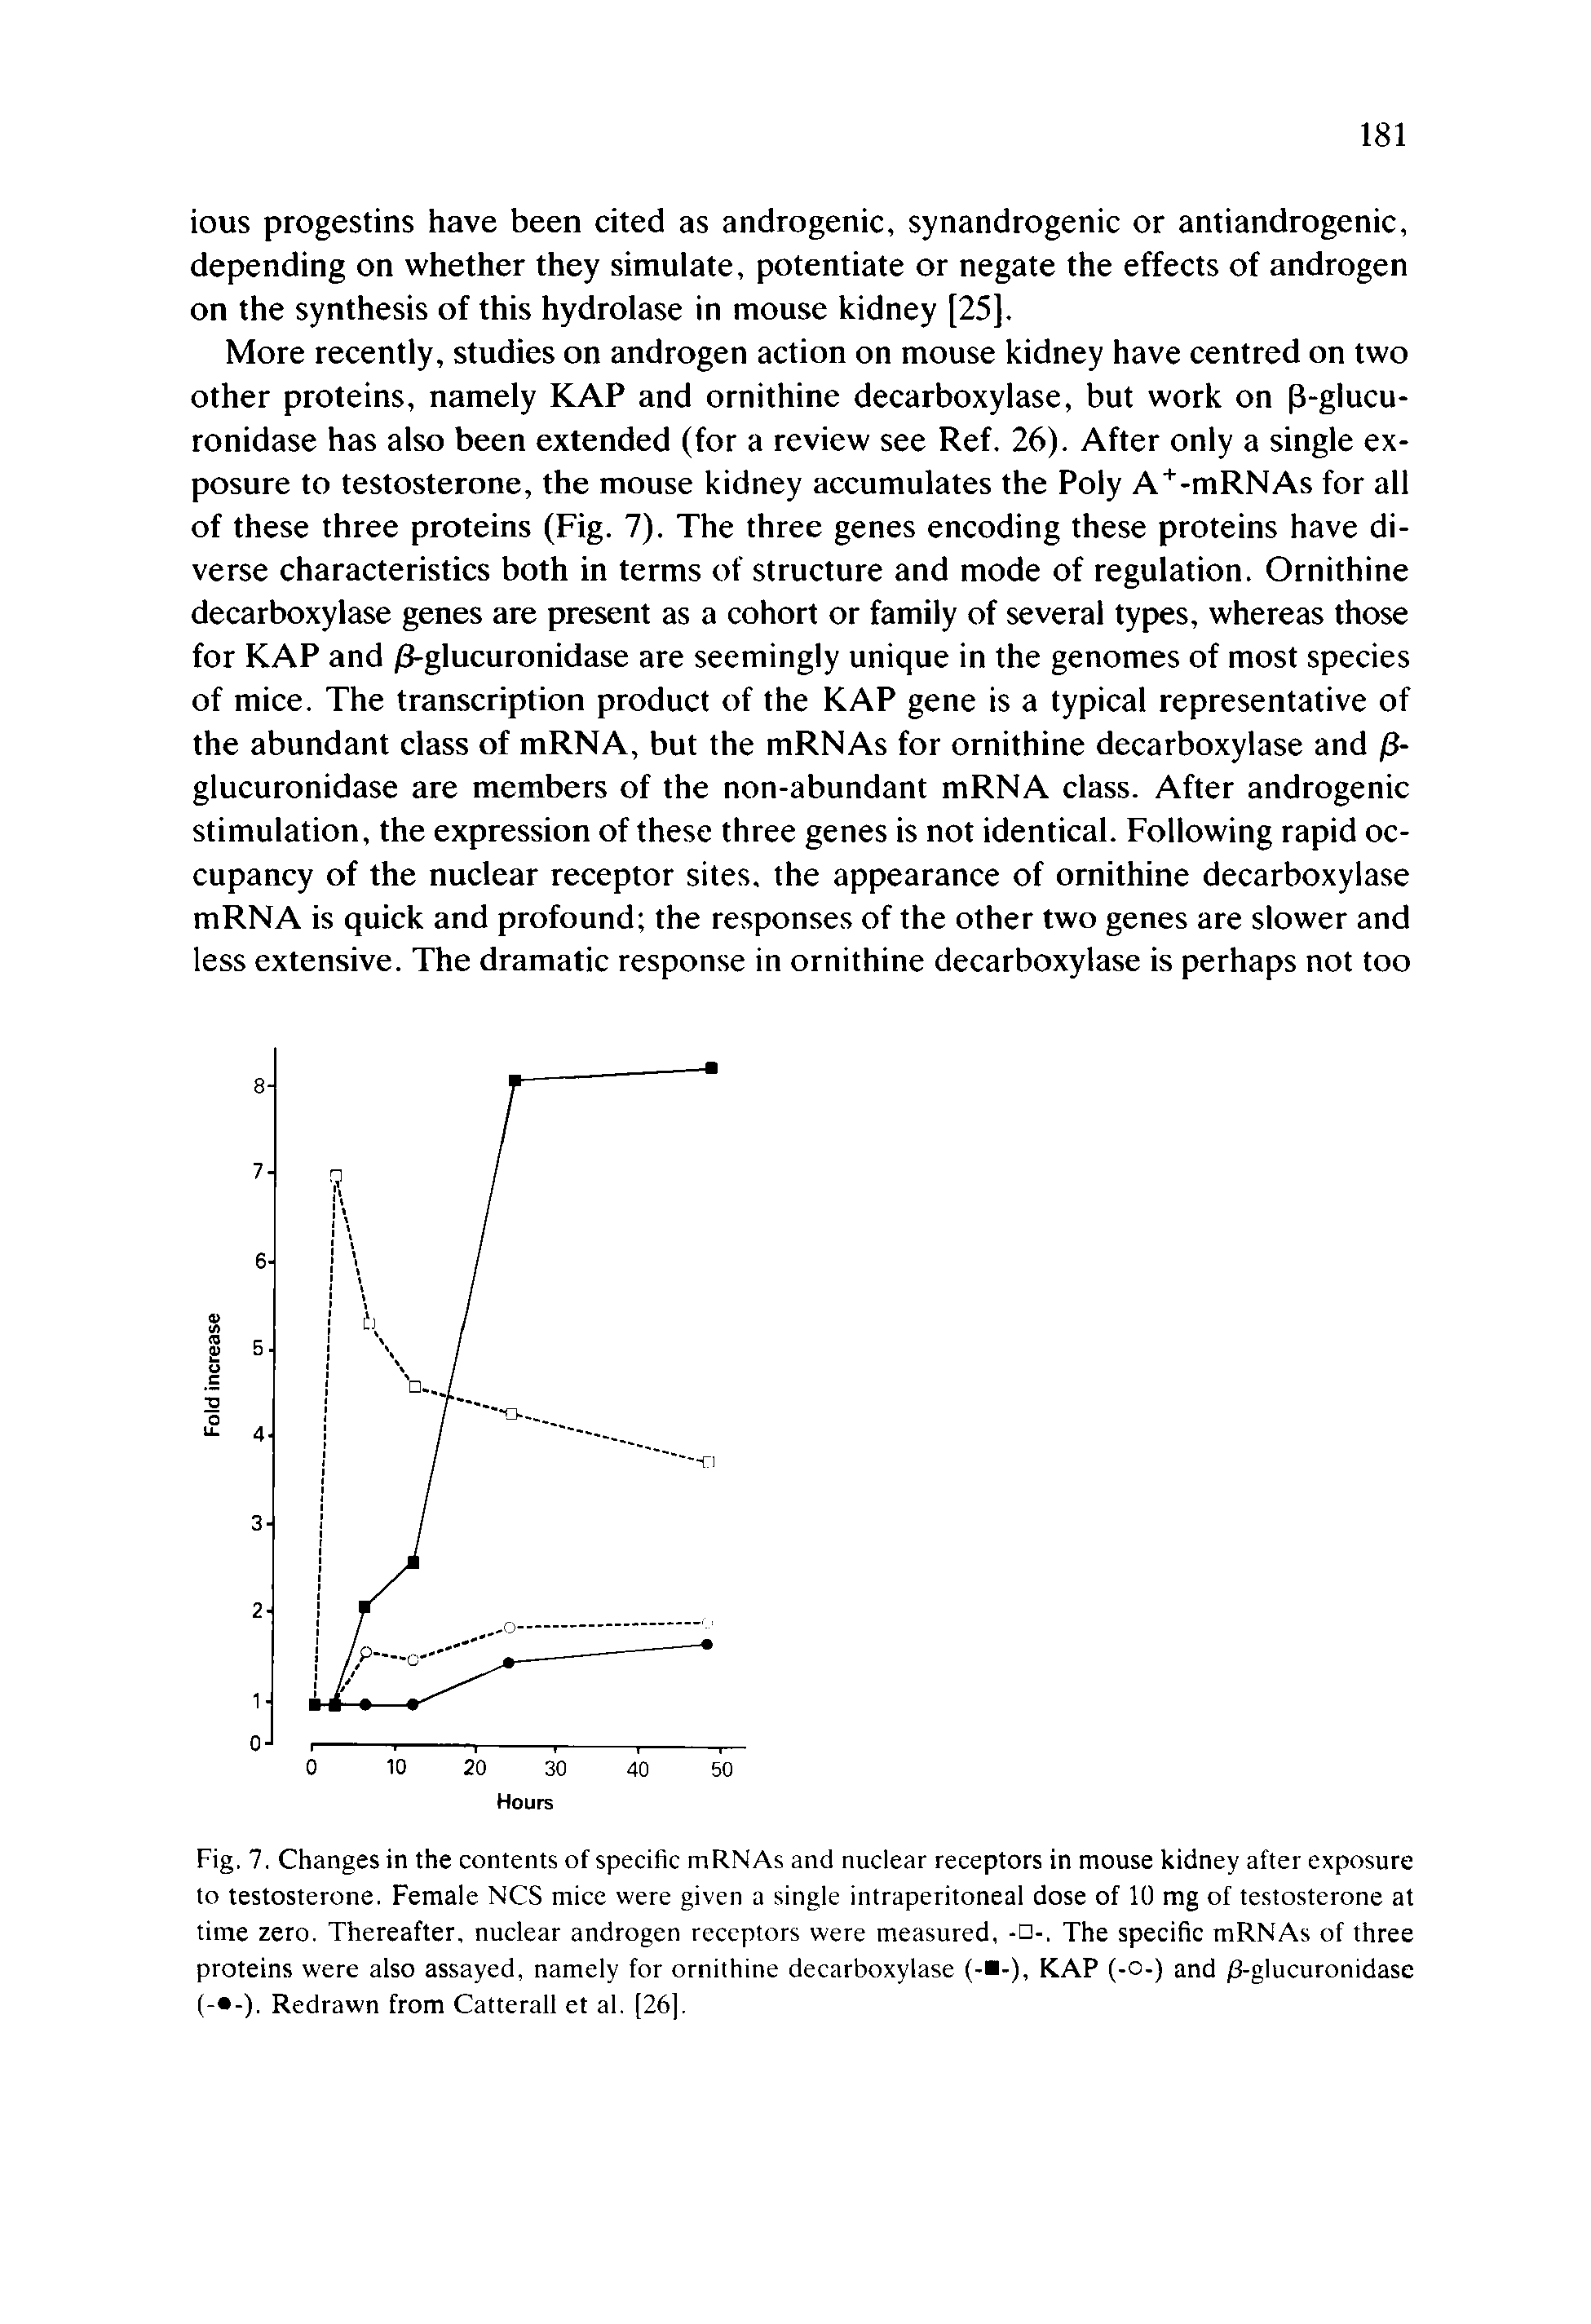 Fig. 7. Changes in the contents of specific mRNAs and nuclear receptors in mouse kidney after exposure to testosterone. Female NCS mice were given a single intraperitoneal dose of 10 mg of testosterone at time zero. Thereafter, nuclear androgen receptors were measured, The specific mRNAs of three proteins were also assayed, namely for ornithine decarboxylase (- -), KAP (-0-) and /3-glucuronidase (- -). Redrawn from Catterall et al. [26],...